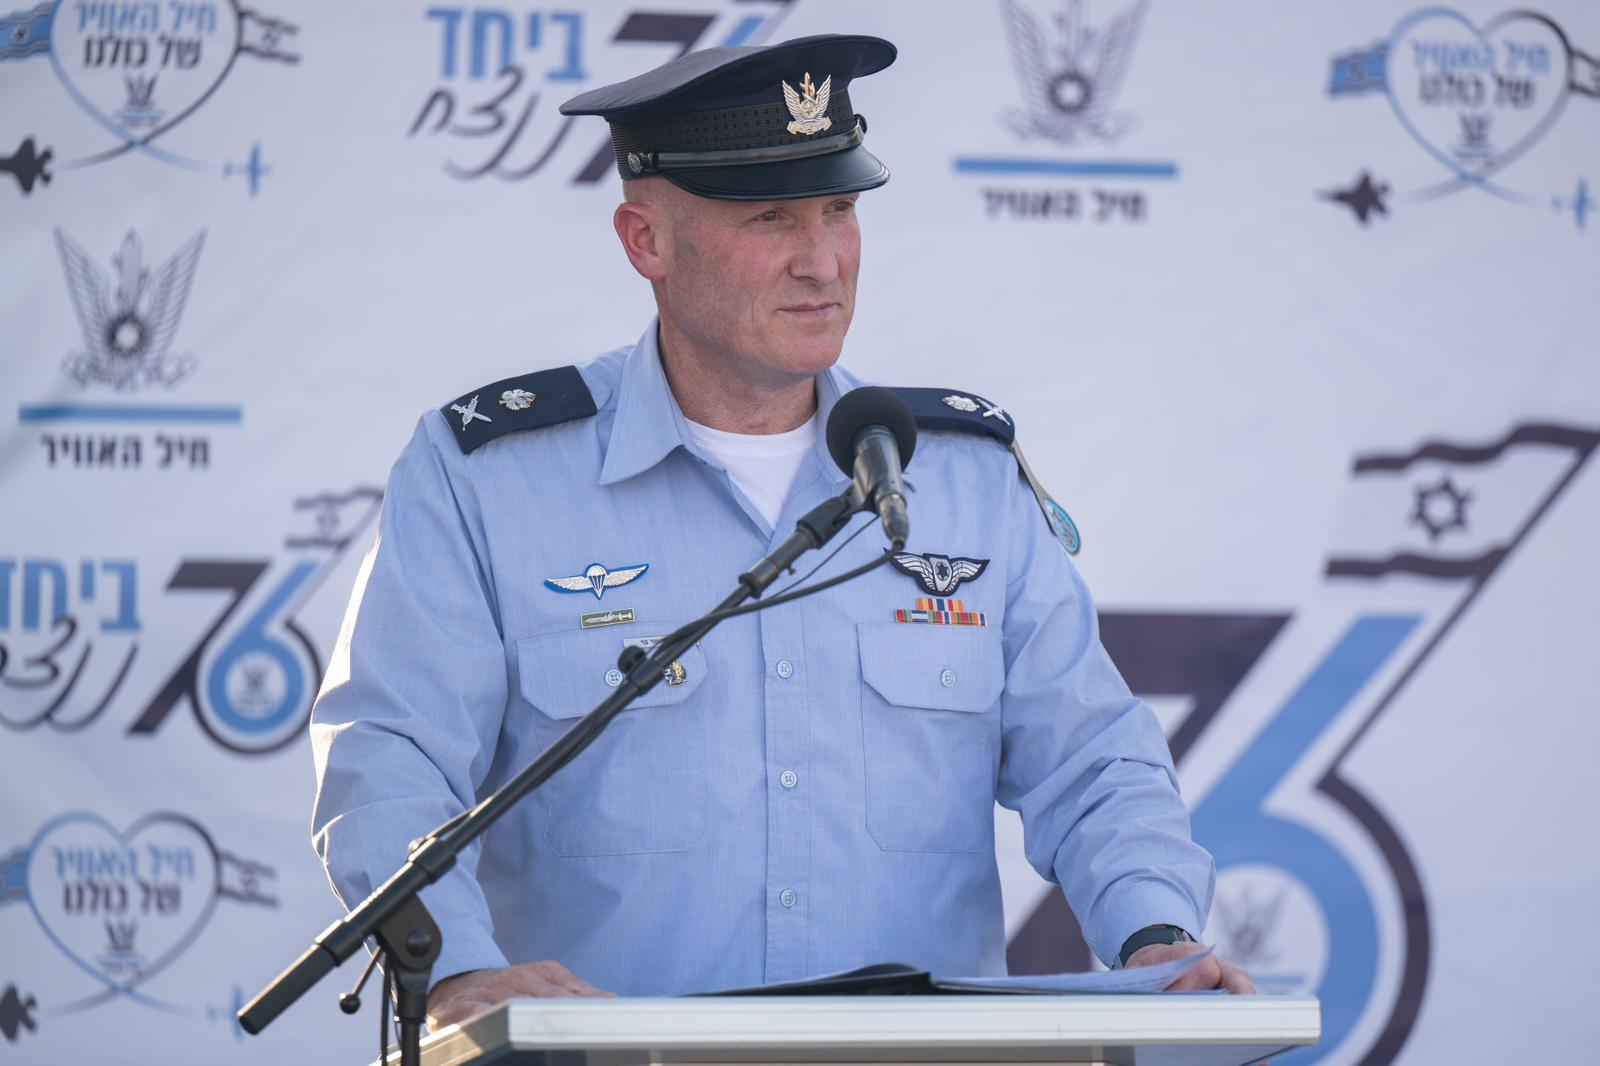 Air force chief says IDF ready to face Hebollah in north, Hamas nearly defeated in Gaza